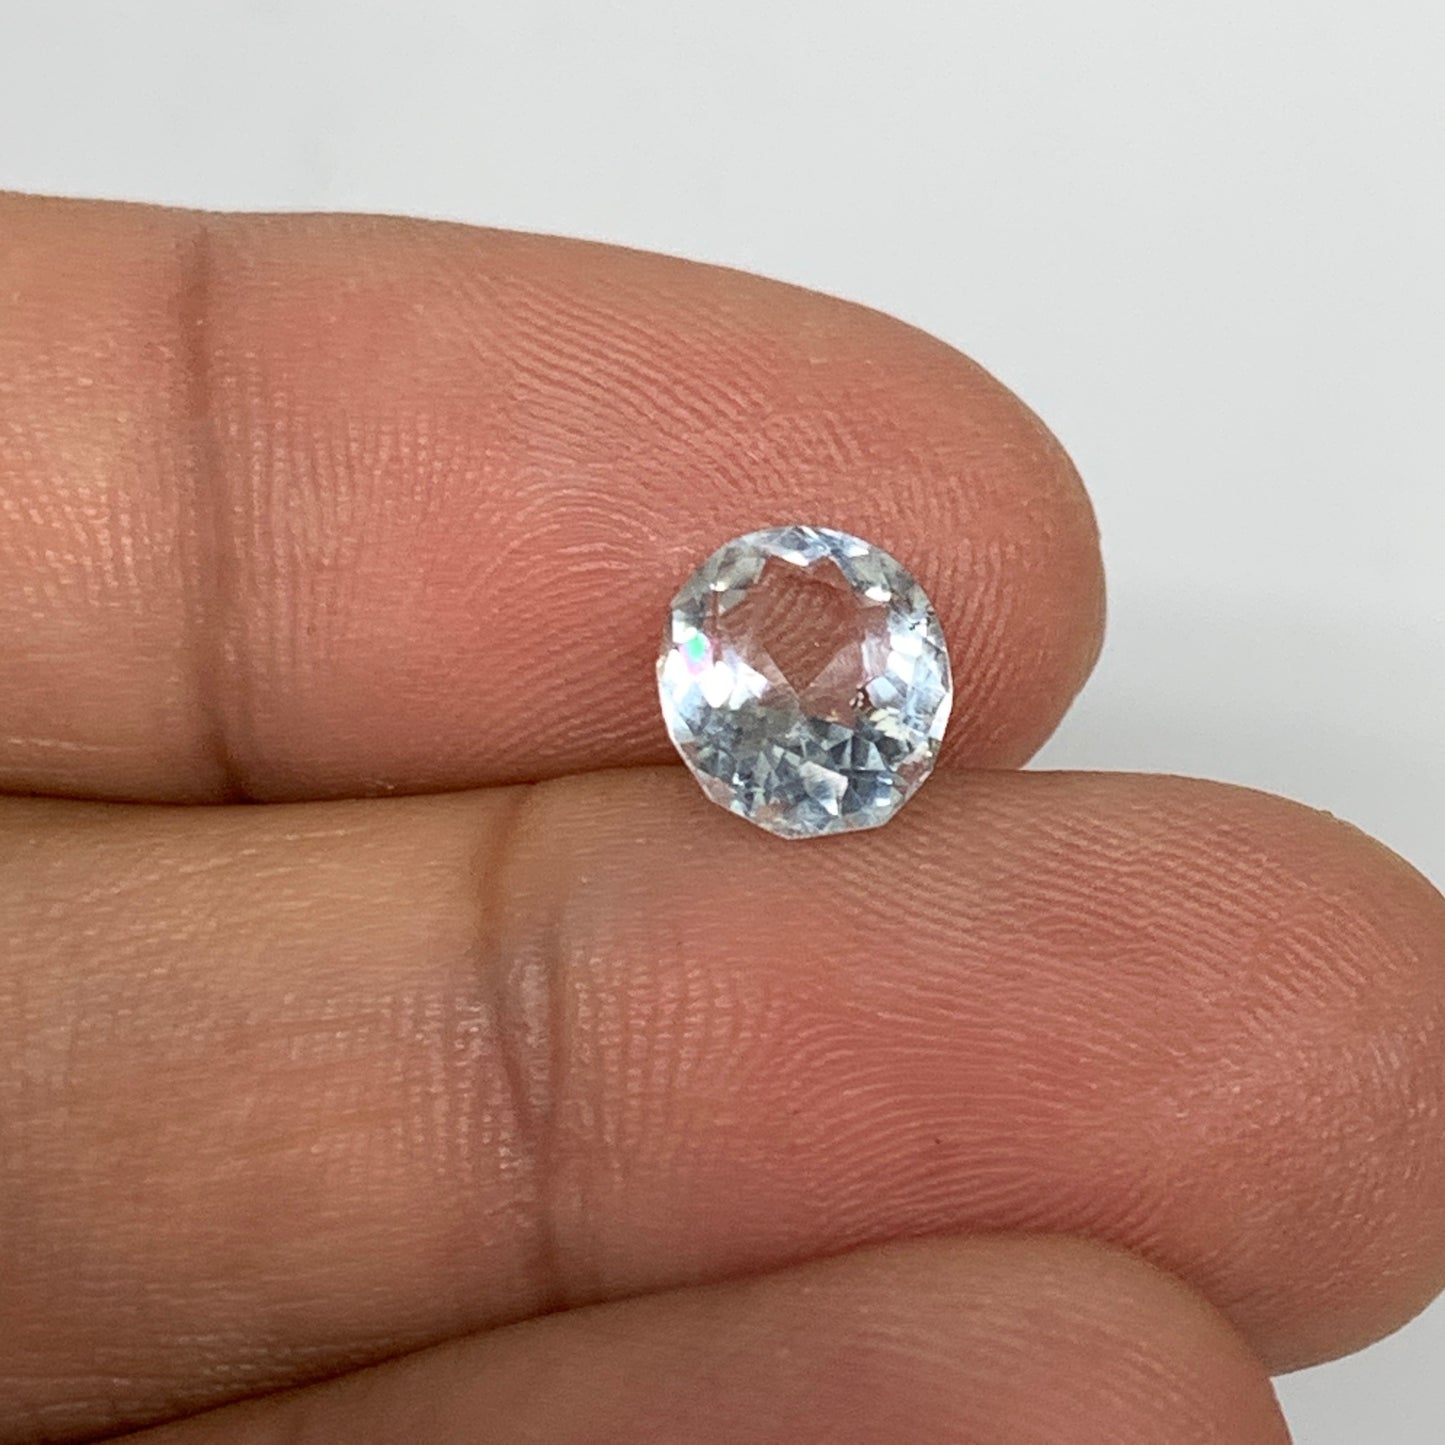 1.43cts, 8mmx7mmx4mm, Aquamarine Crystal Facetted Stone Loose @Pakistan,CTS124